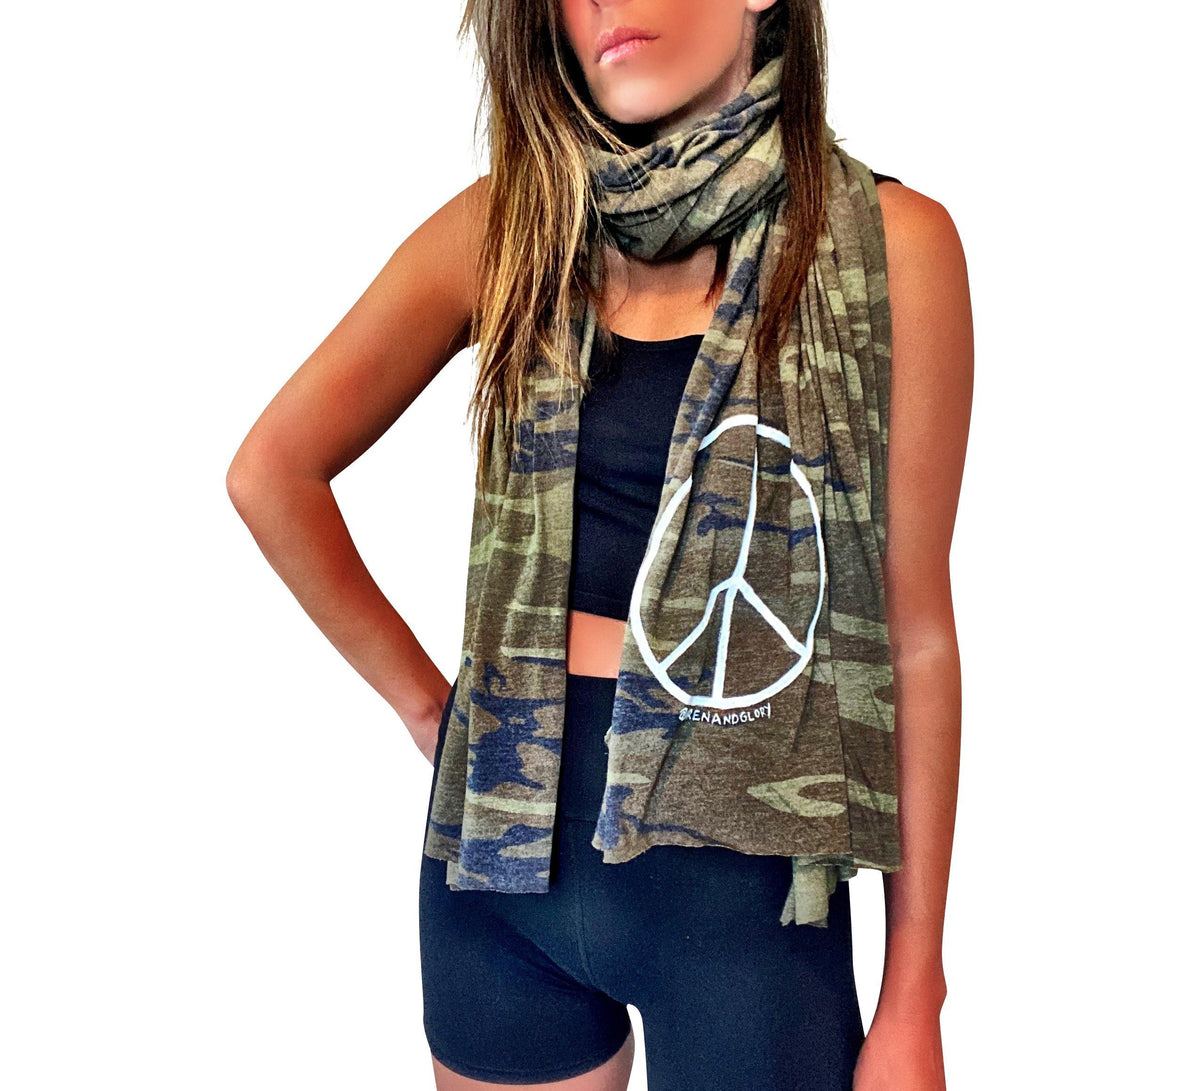 'PEACE OUT' PAINTED SCARF / FACE COVERING